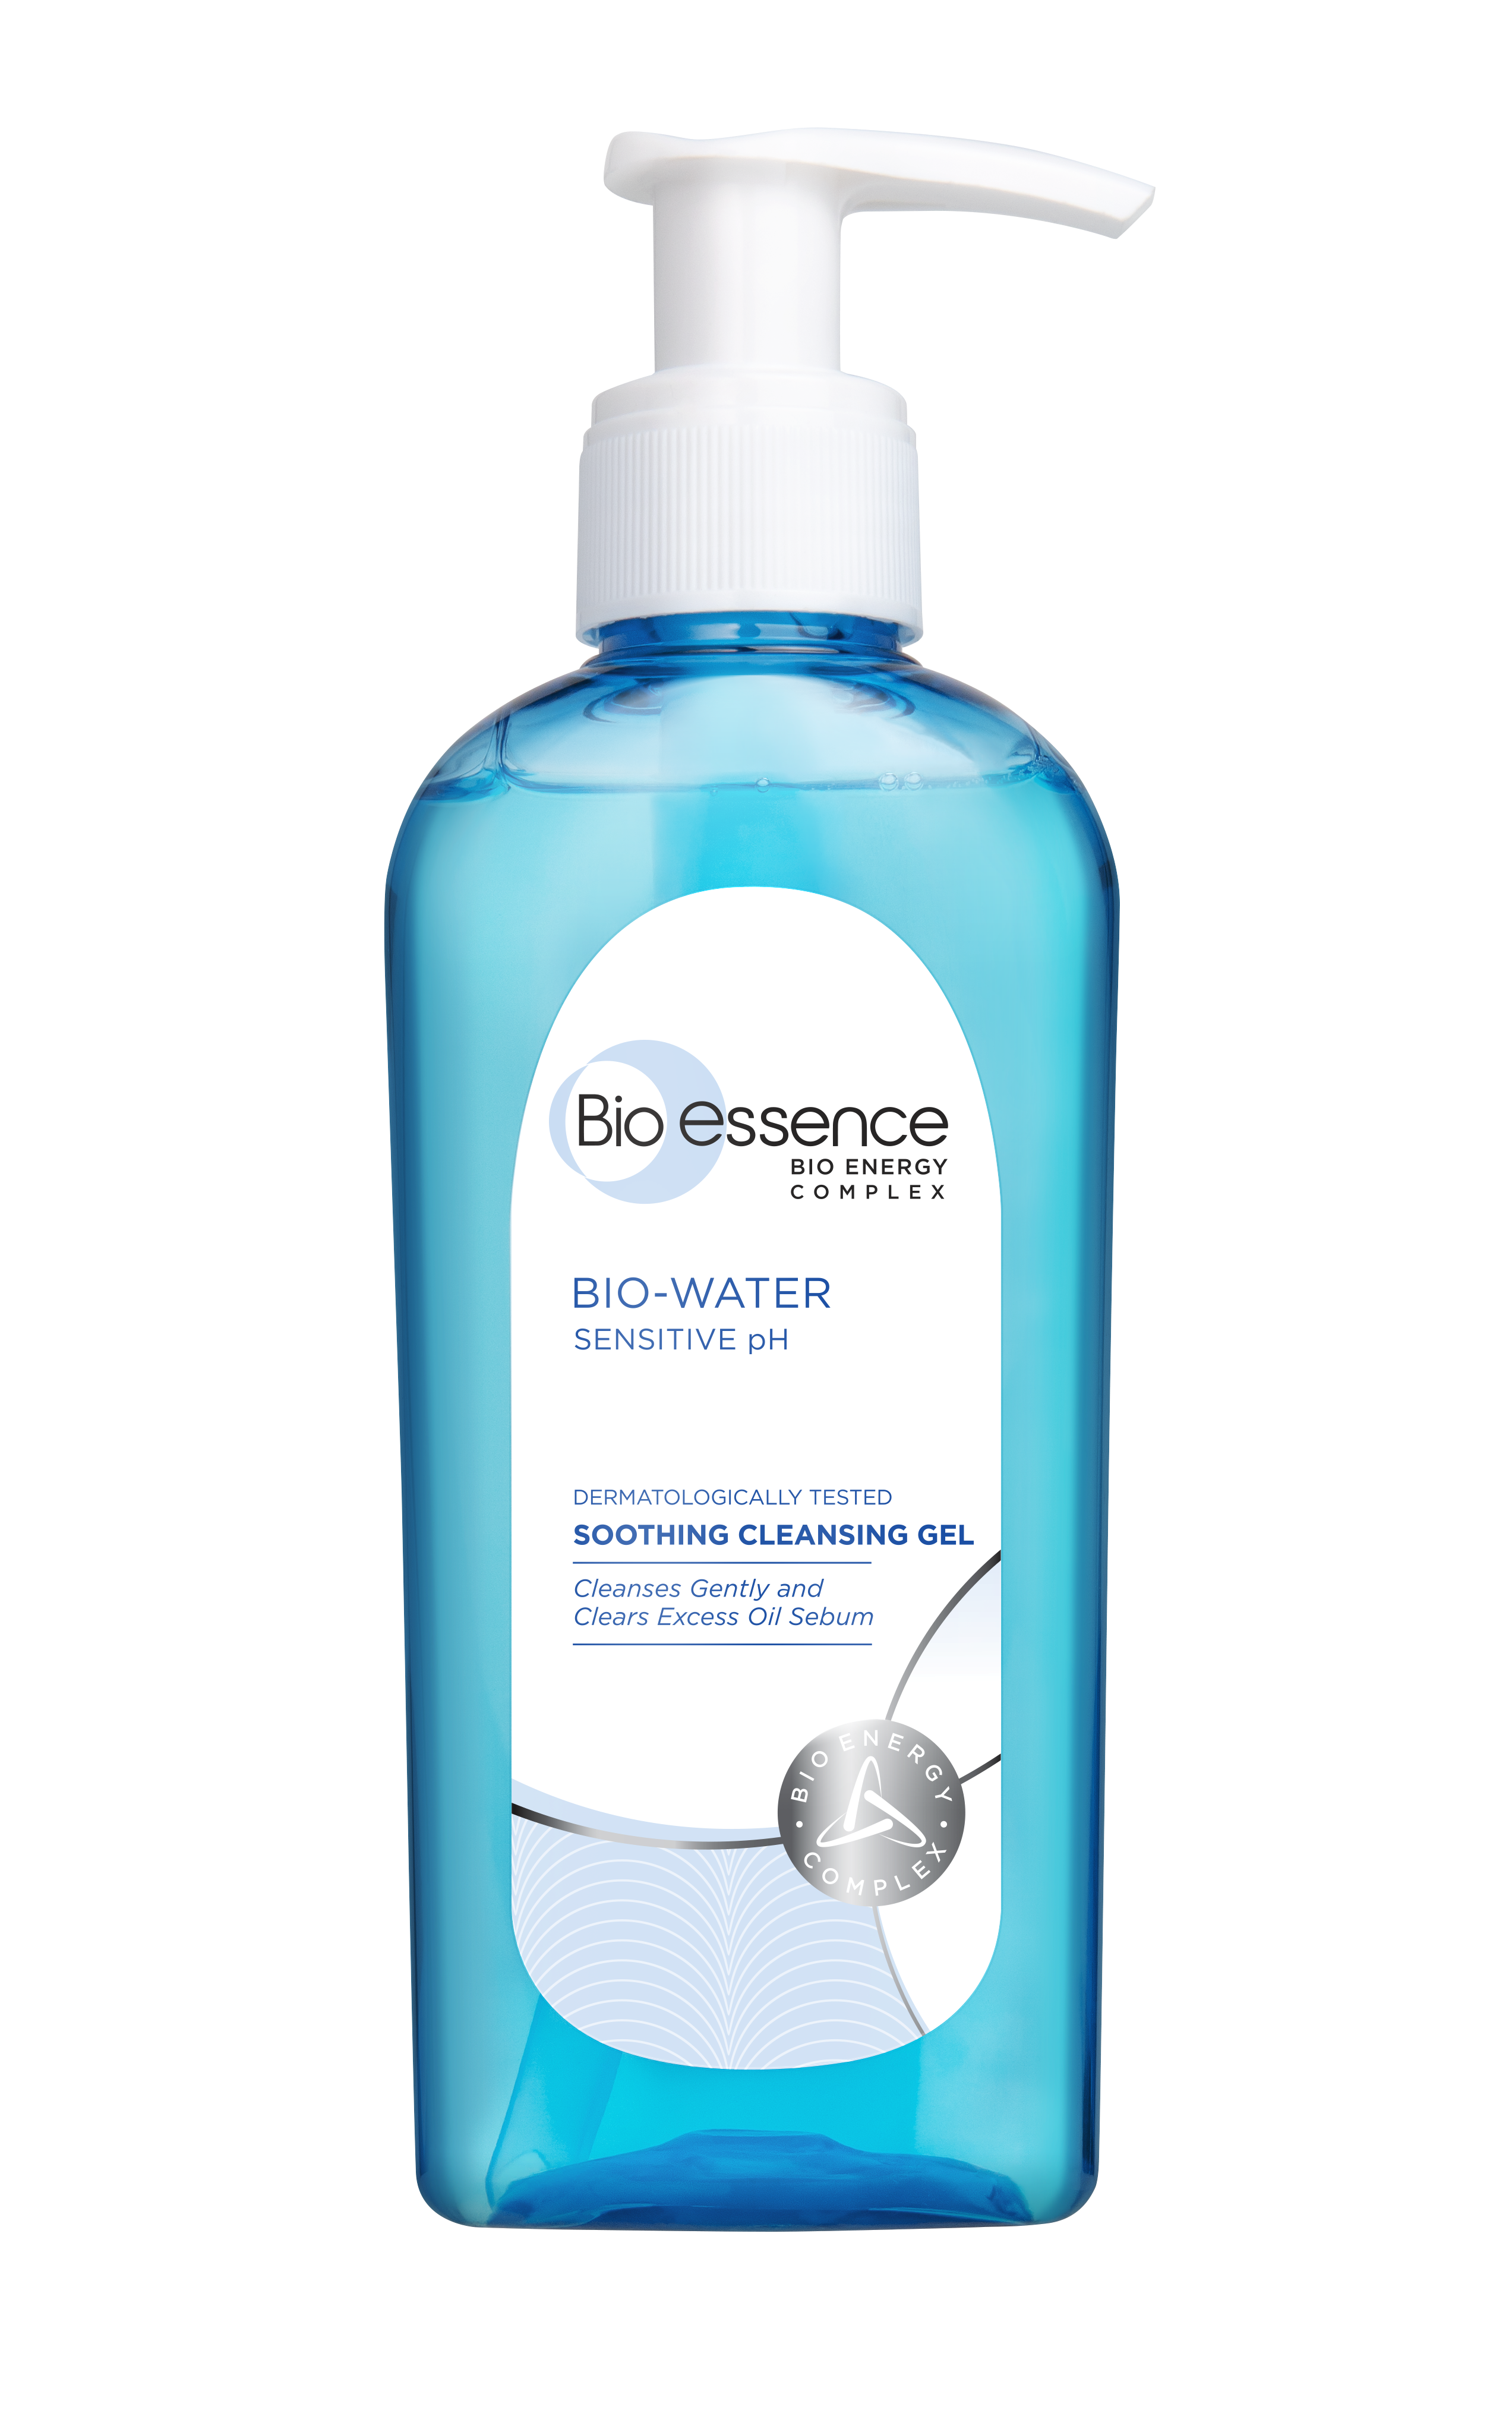 Bio-Water Sensitive pH Dermatologically Tested B5 Soothing Cleansing Gel Cleanses Gently and Clears Excess Oil Seburn